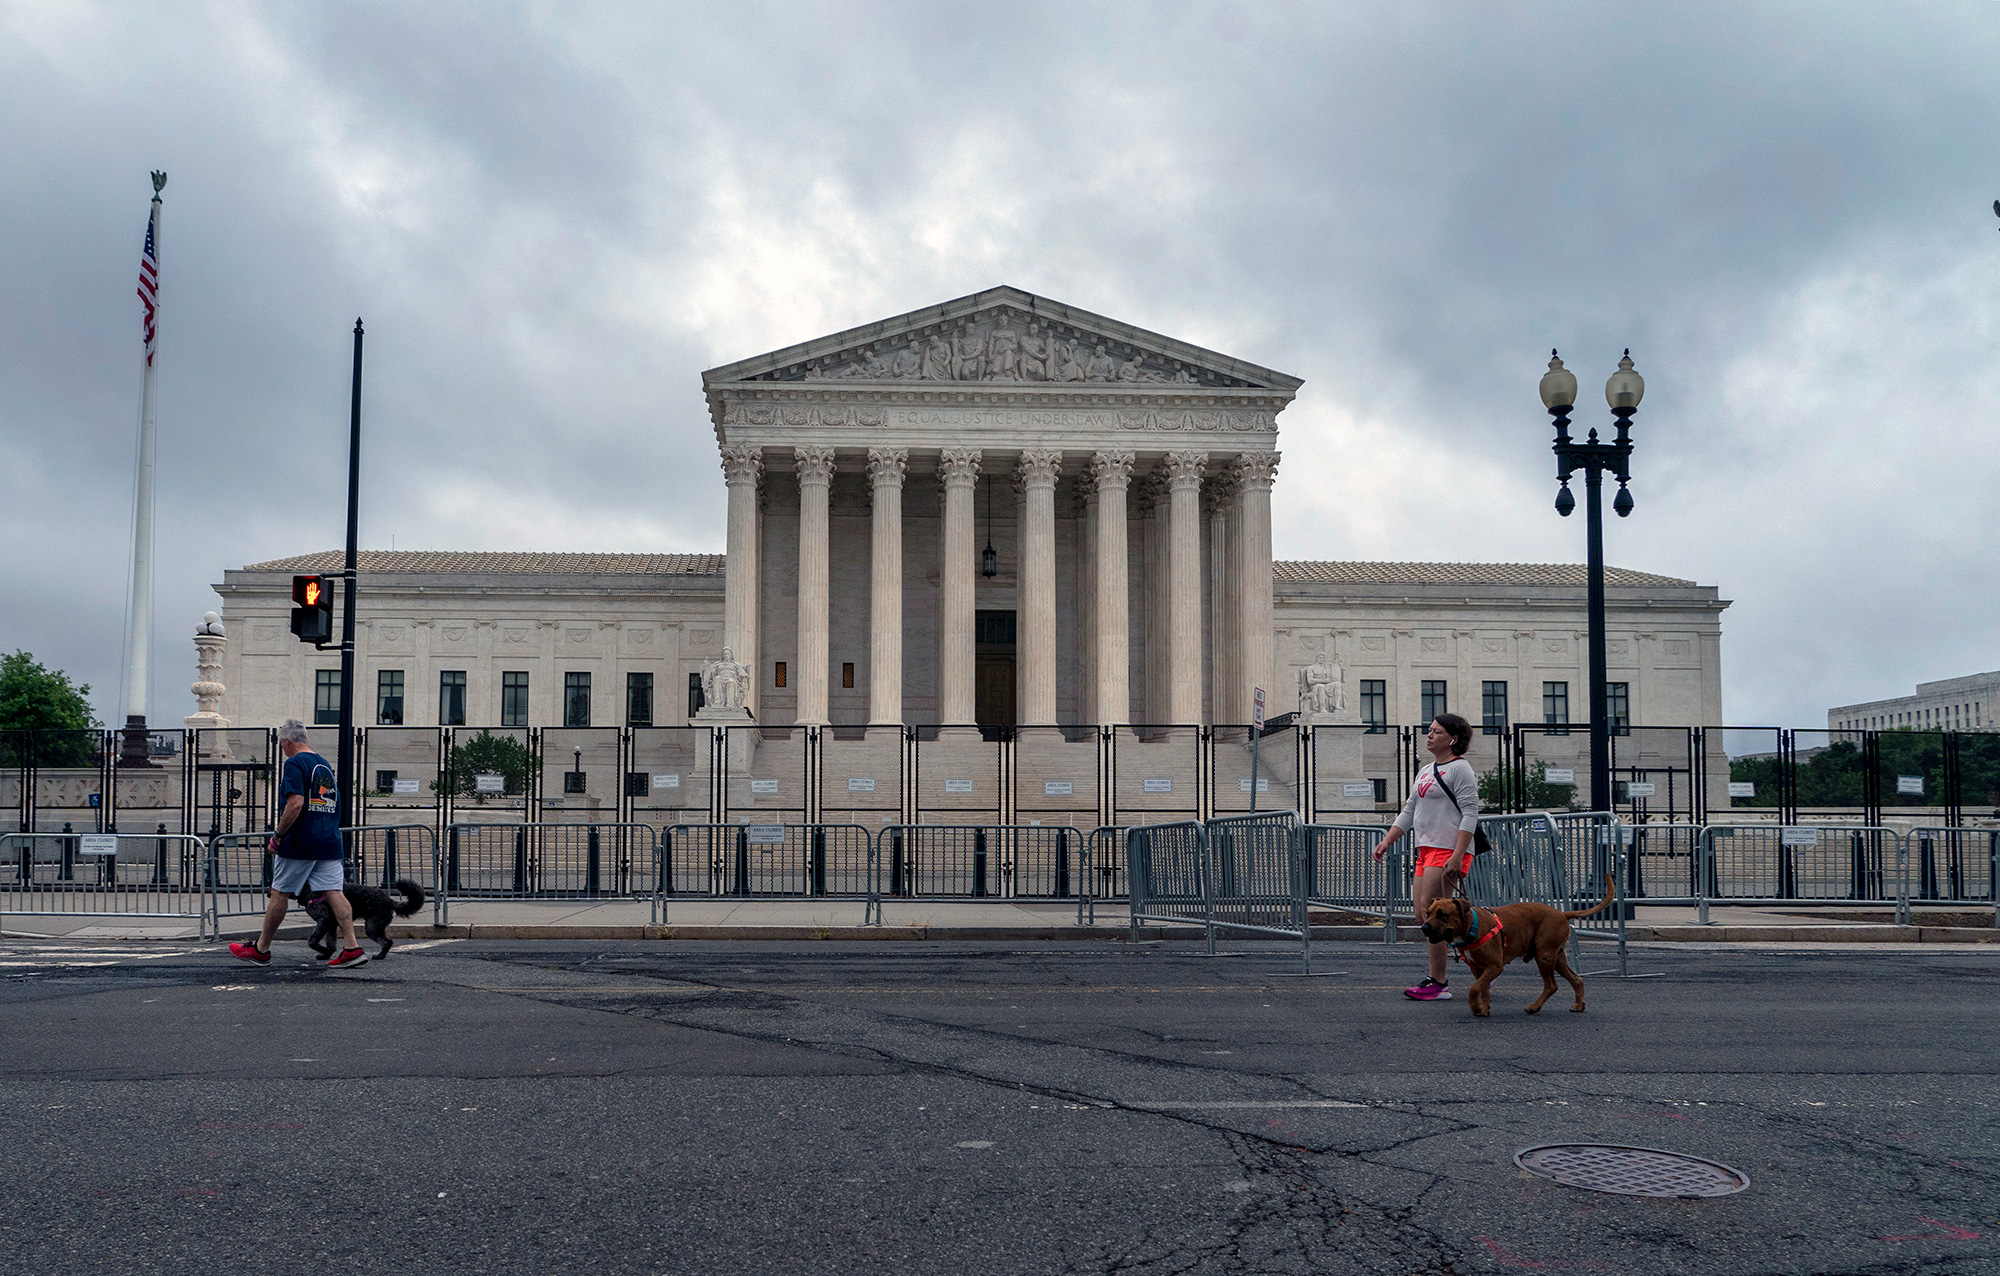 People walk dogs past anti-scaling fencing erected around the U.S. Supreme Court building in Washington, on Thursday, June 23.